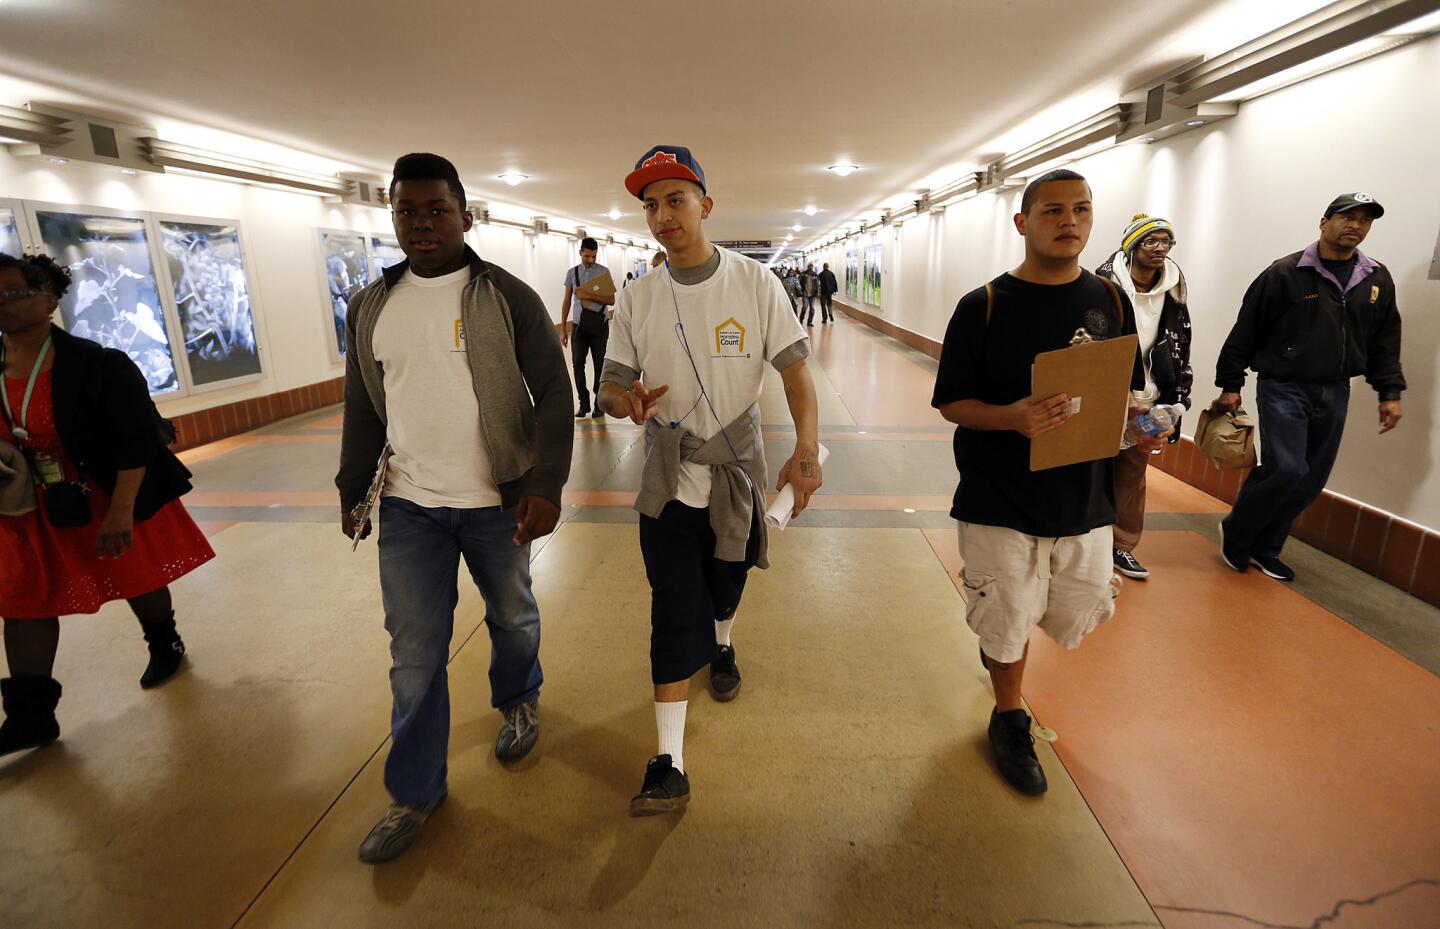 L.A.'s homeless young people